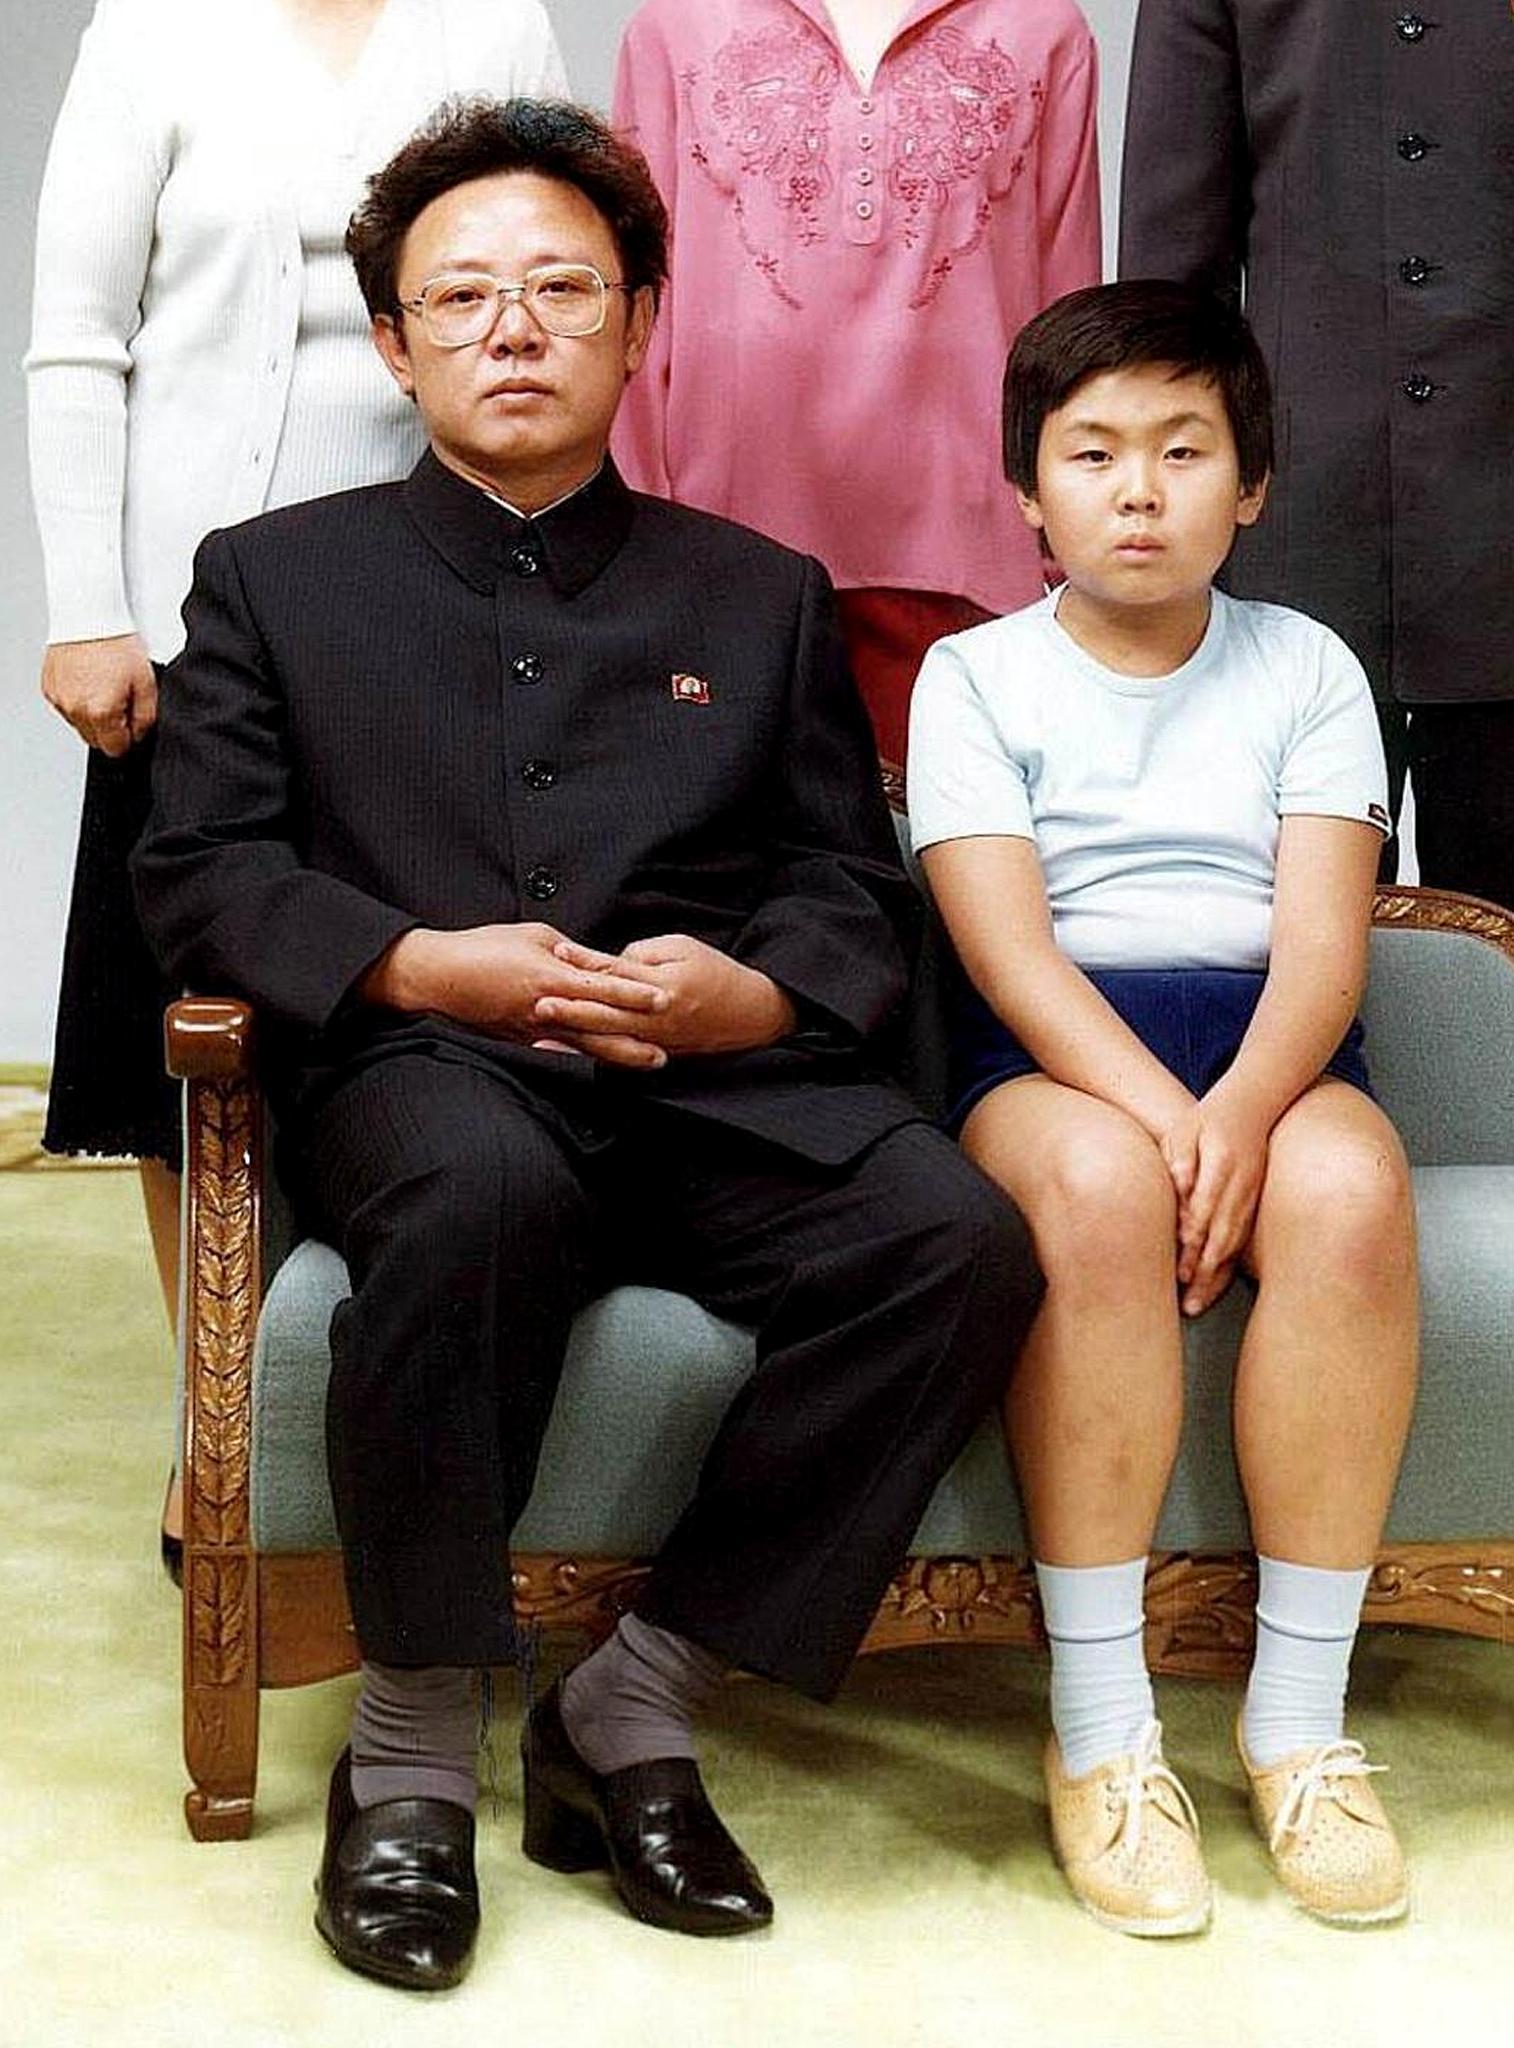 This file photo taken 19 August 1981 in Pyongyang and recently released shows North Korean leader Kim Jong-Il (L) sitting with his son, Jong-Nam (R). A man believed to the the eldest son of Kim Jong-Il, Kim Jong-Nam, was seized by Japanese immigration officials at Tokyo's Narita international airport, news reports said 03 May 2001. The younger Kim, now said to be 30-years-old, was stopped with a false passport believed to be issued by a country in either Central or South America. (KOREA OUT) ANSA/cyk/rab